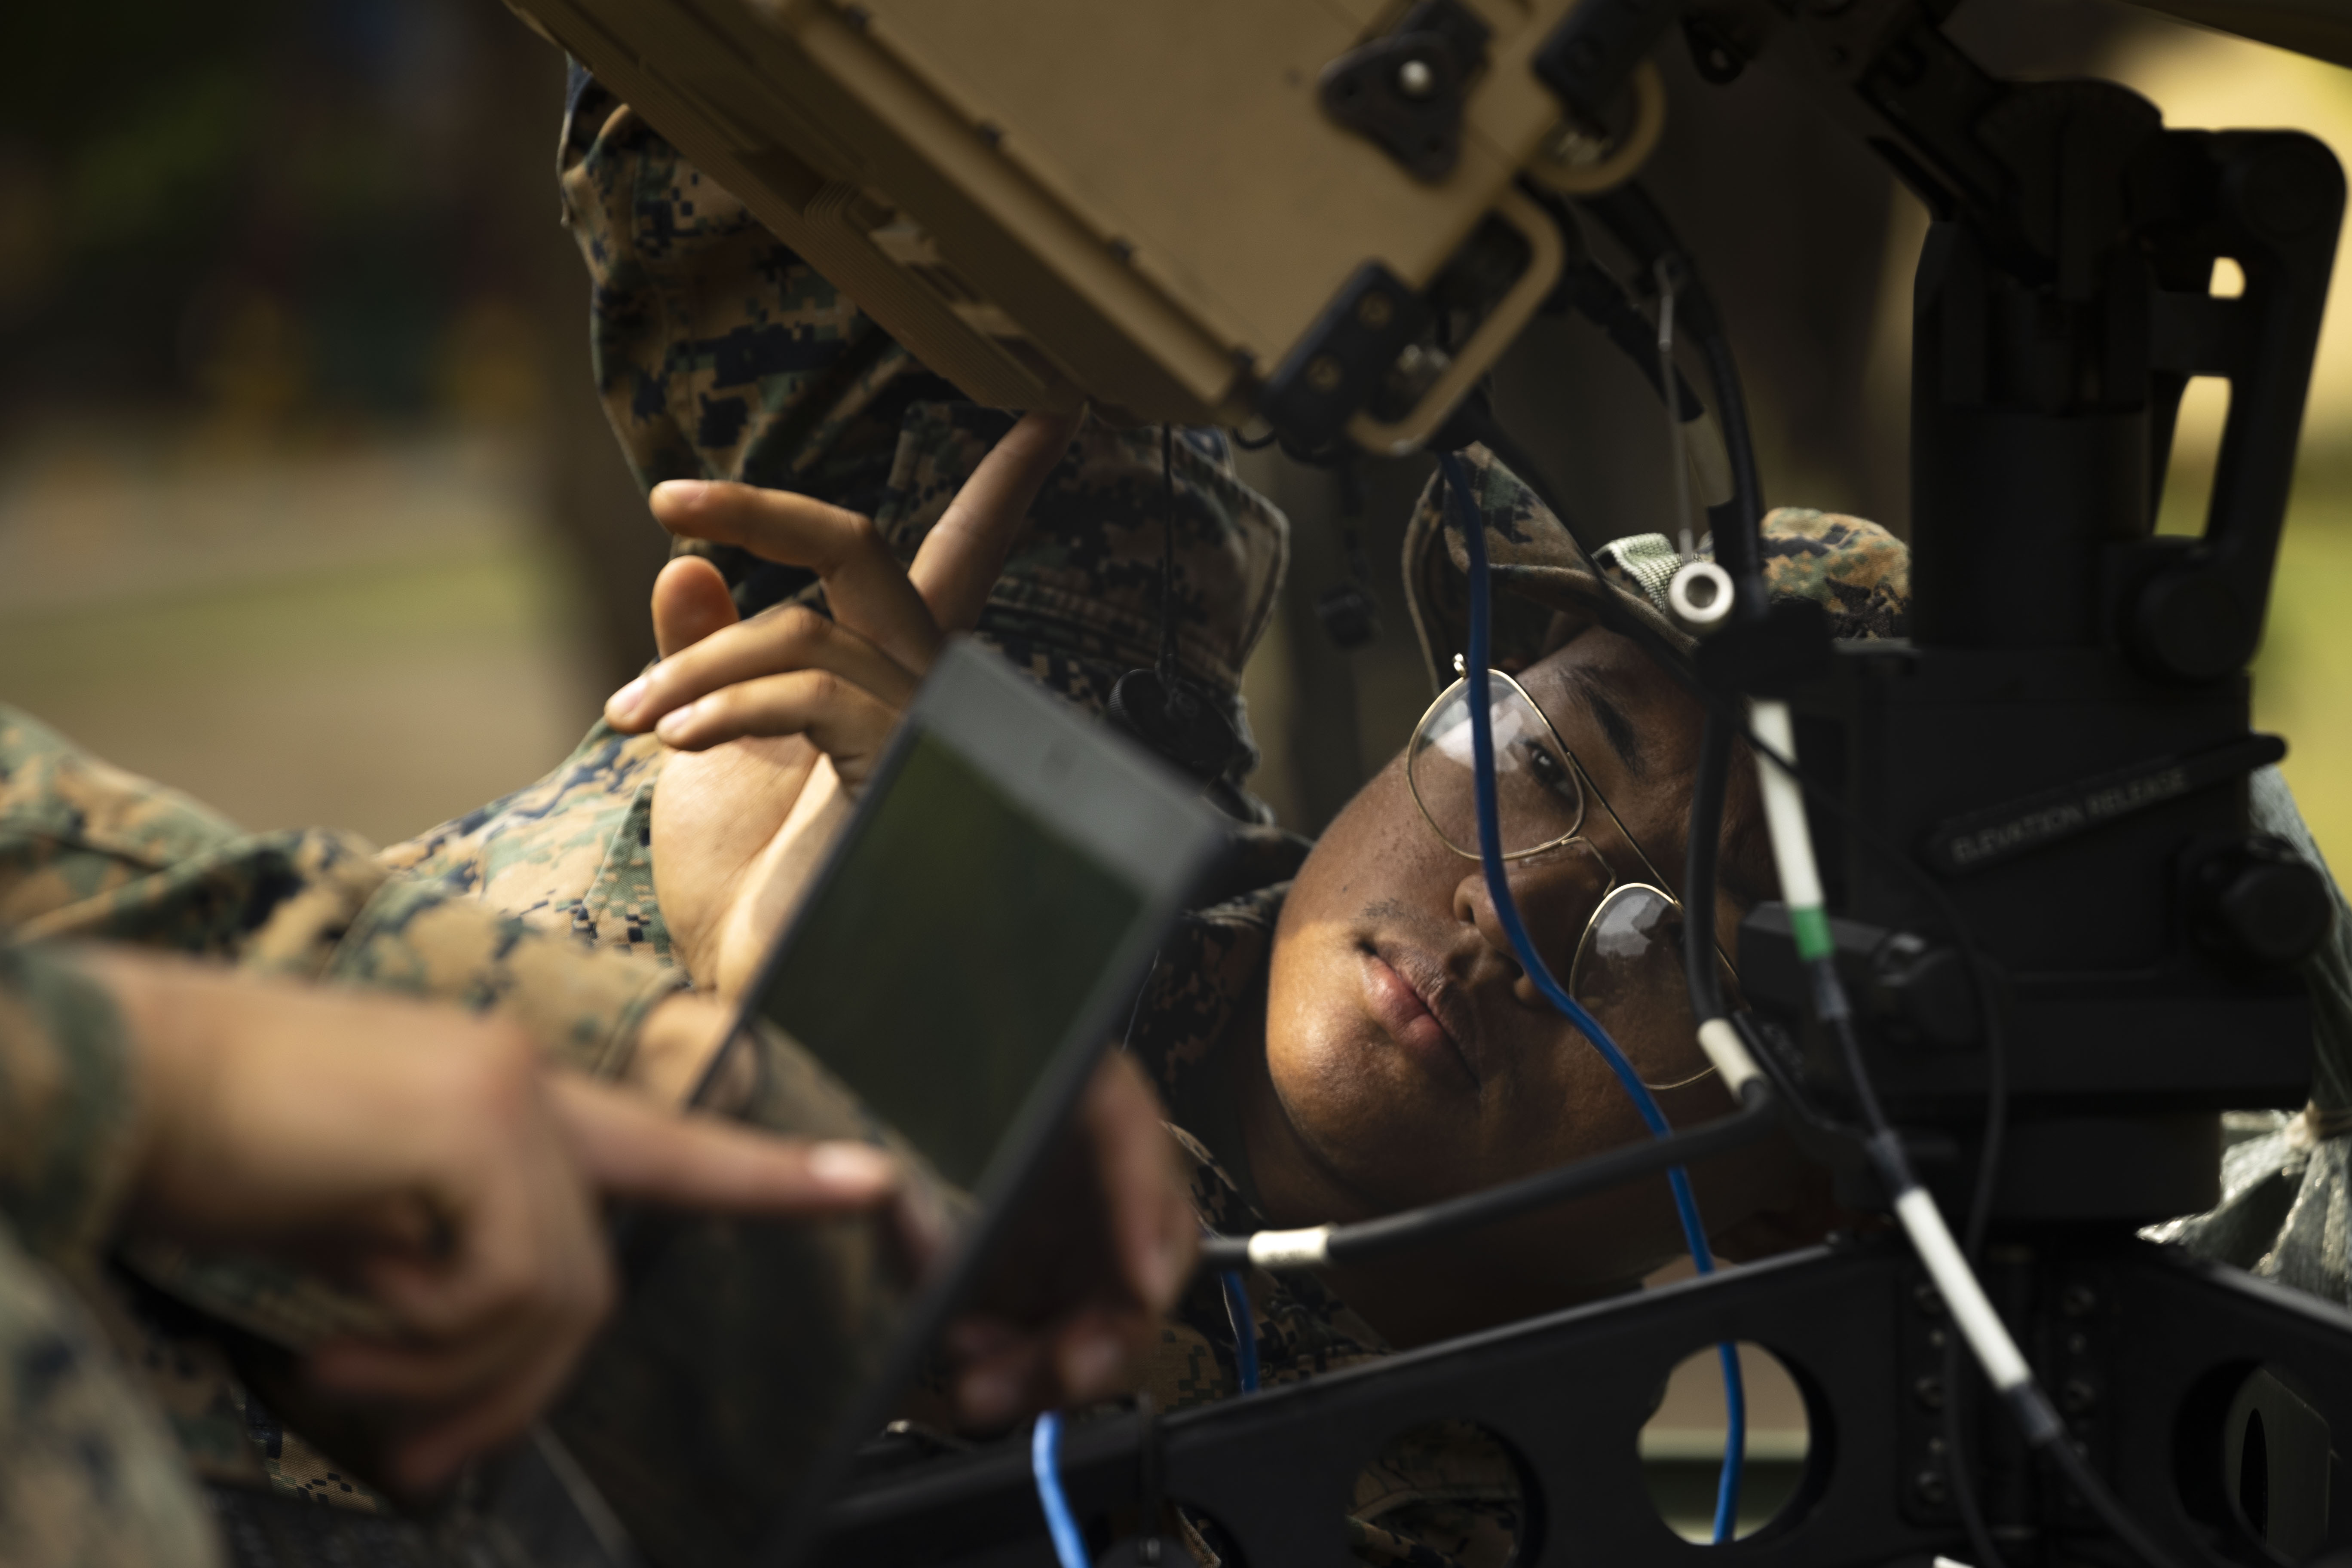 U.S. Marine Corps Cpl. Kawtamwe Htoo, a satellite communications operator with Headquarters Battalion, 3d Marine Division, establishes satellite communications during Balikatan 23 at Marine Base Gregorio Lim, Philippines, April 11, 2023. Balikatan 2023 is the 38th iteration of the annual bilateral exercise between the Armed Forces of the Philippines and the U.S. military. The exercise includes three weeks of training focused on amphibious operations, command and control, humanitarian assistance, urban operations and counterterrorism skills throughout northern and western Luzon. Coastal defense training figures prominently in the Balikatan 23 training schedule. Htoo, a native of Sherman, Texas, shared his philosophy on small unit leadership saying, “Keep your Marines informed and supervise. Allow your Marines to take on the task in their way. Help them if they need it, that’s how you build a leader.”